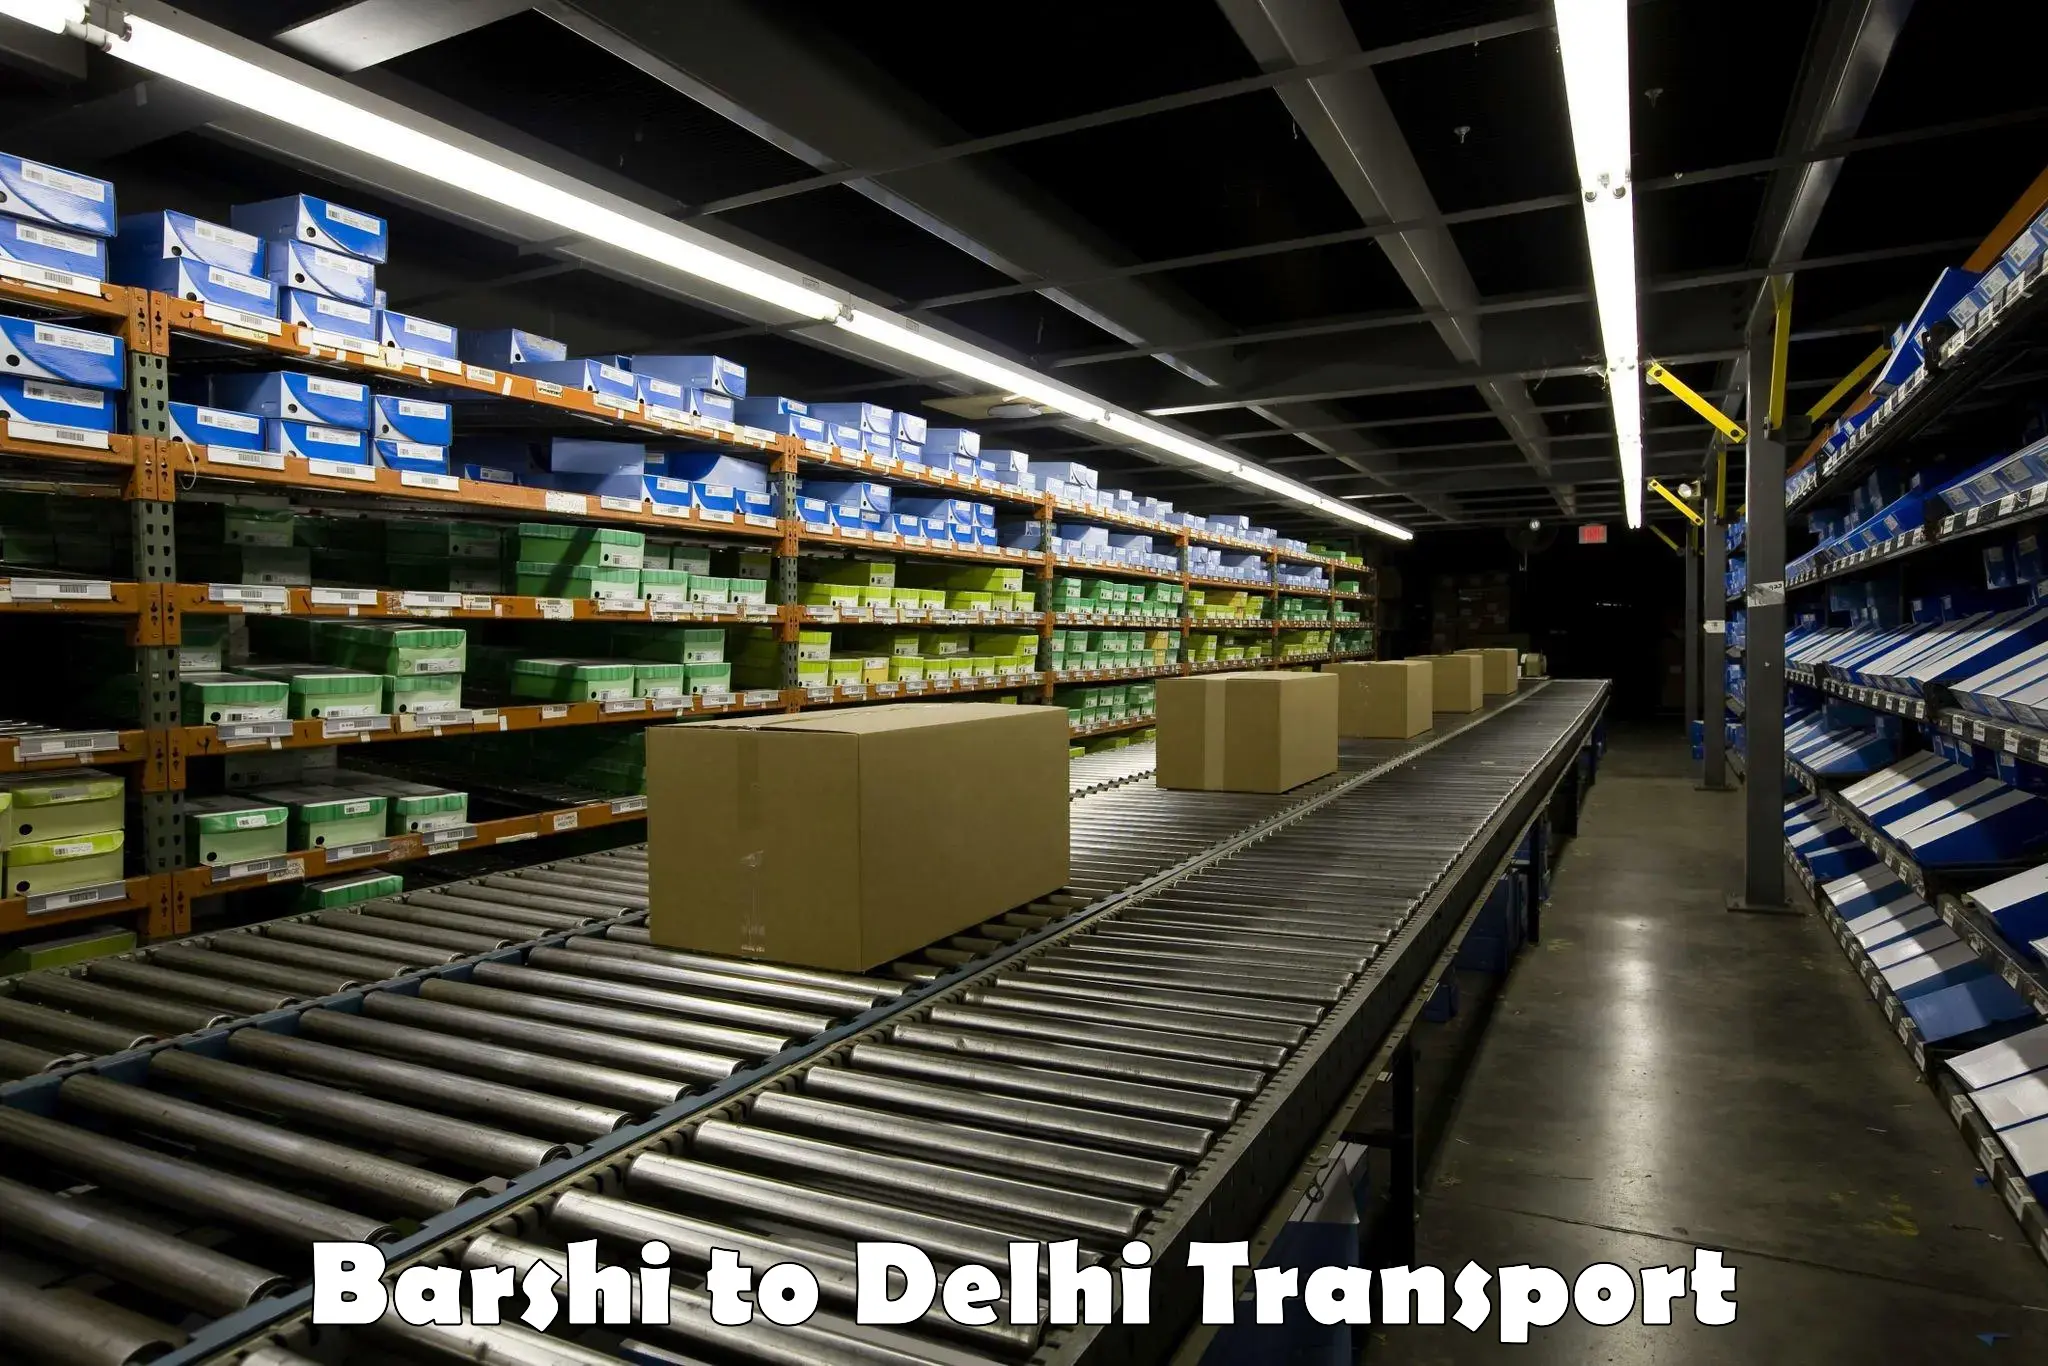 Two wheeler transport services Barshi to Delhi